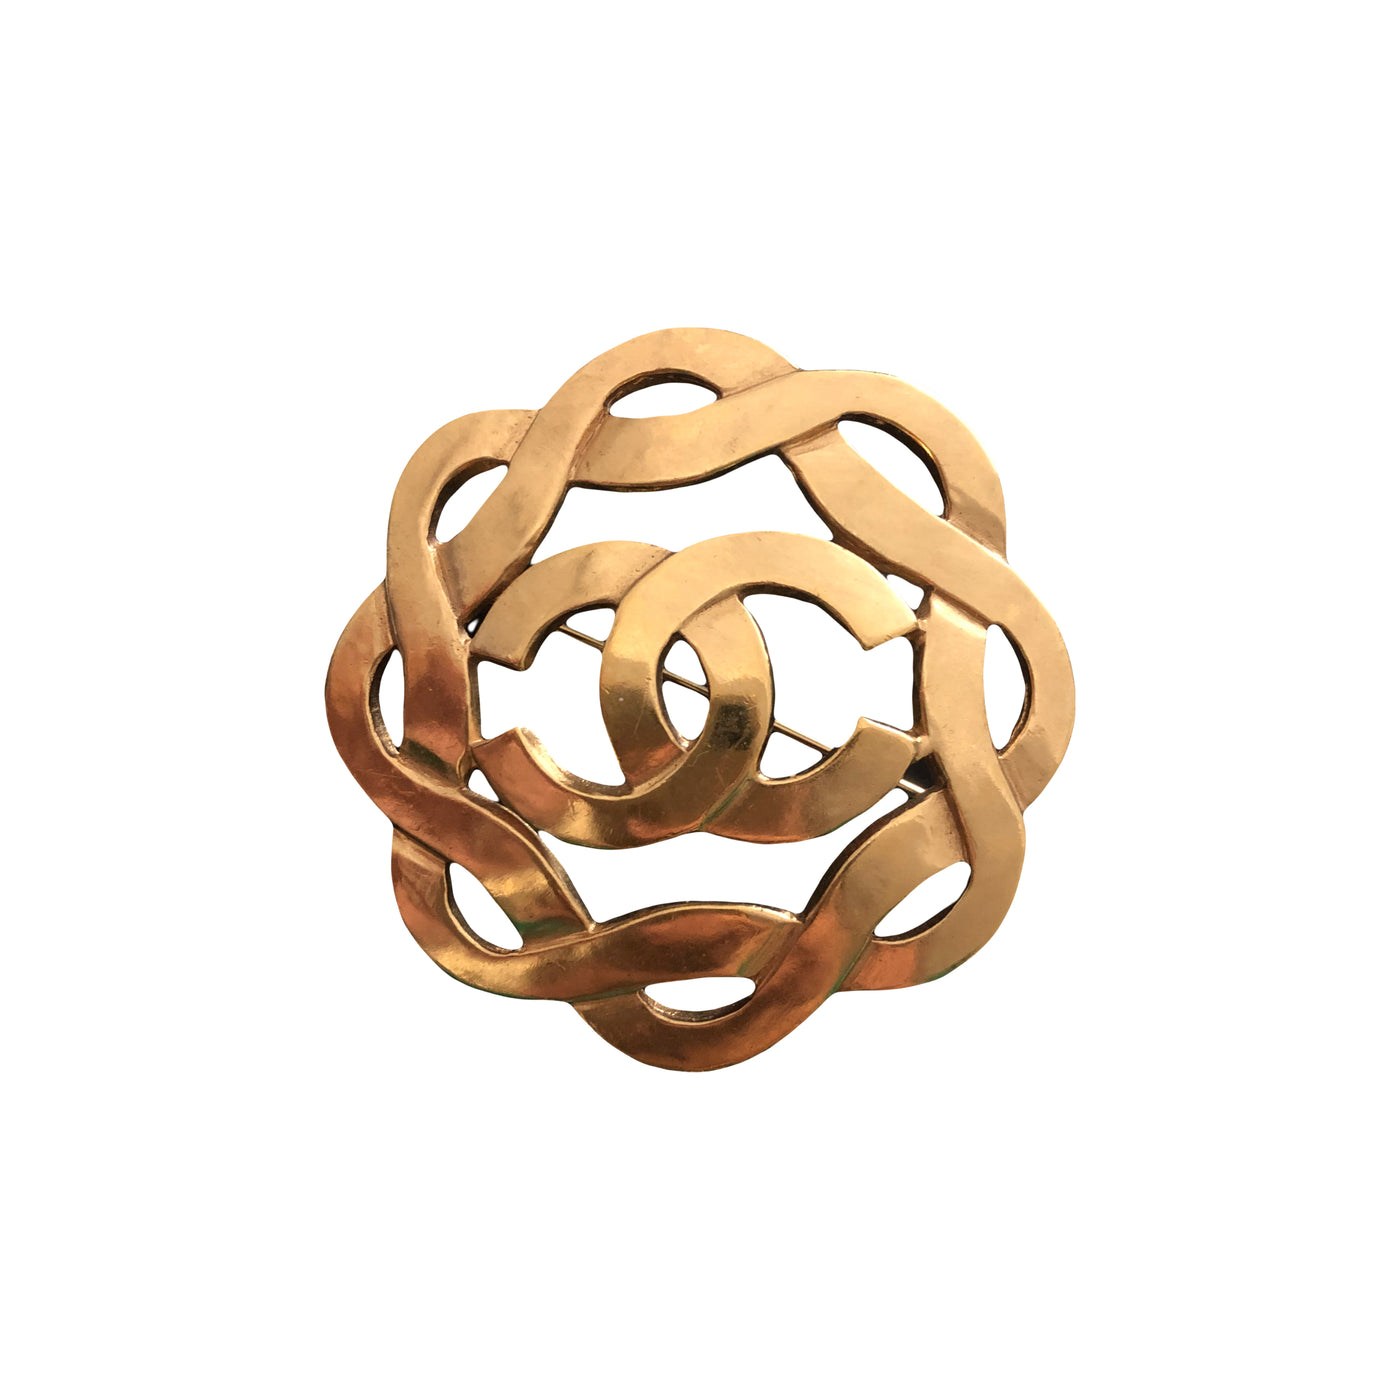 CHANEL Vintage 1997 gold intertwined brooch